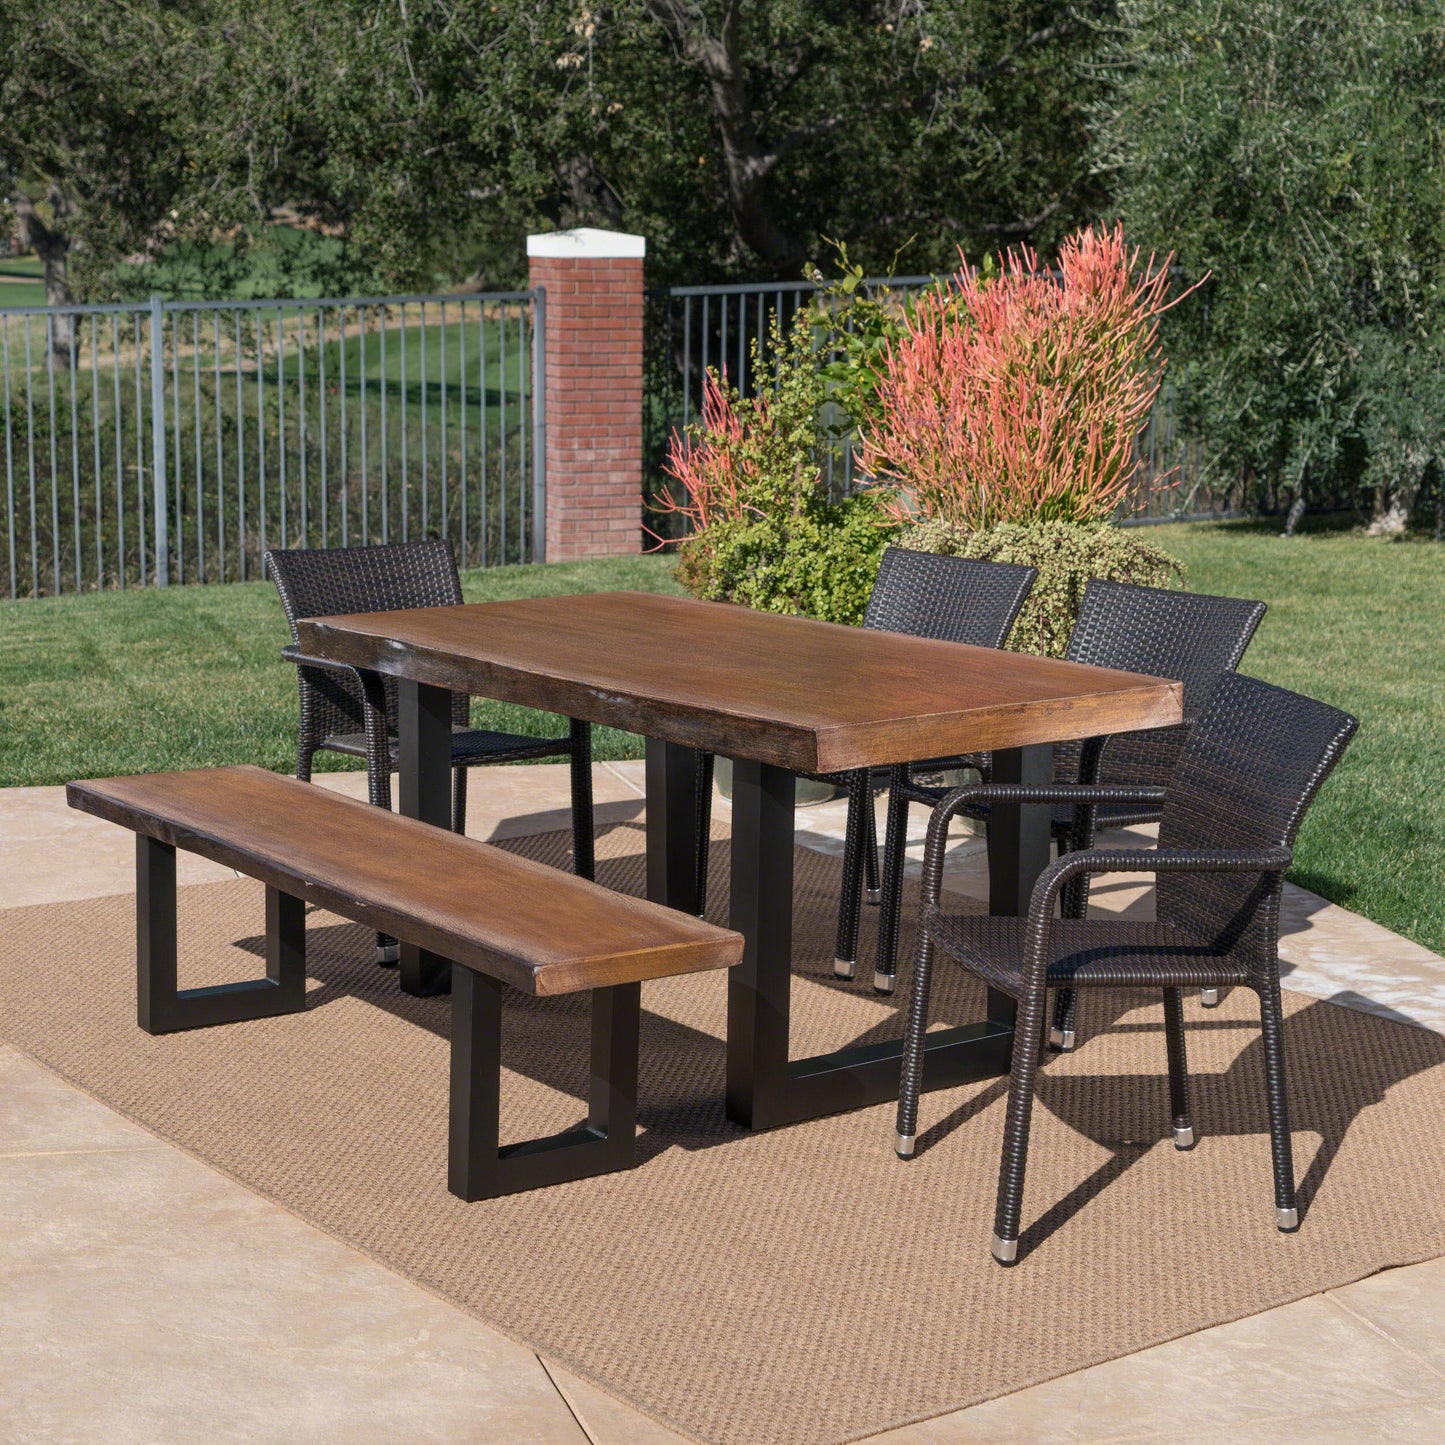 Zendaya Outdoor 6 Piece Wicker Dining Set with Light Weight Concrete Table and Bench